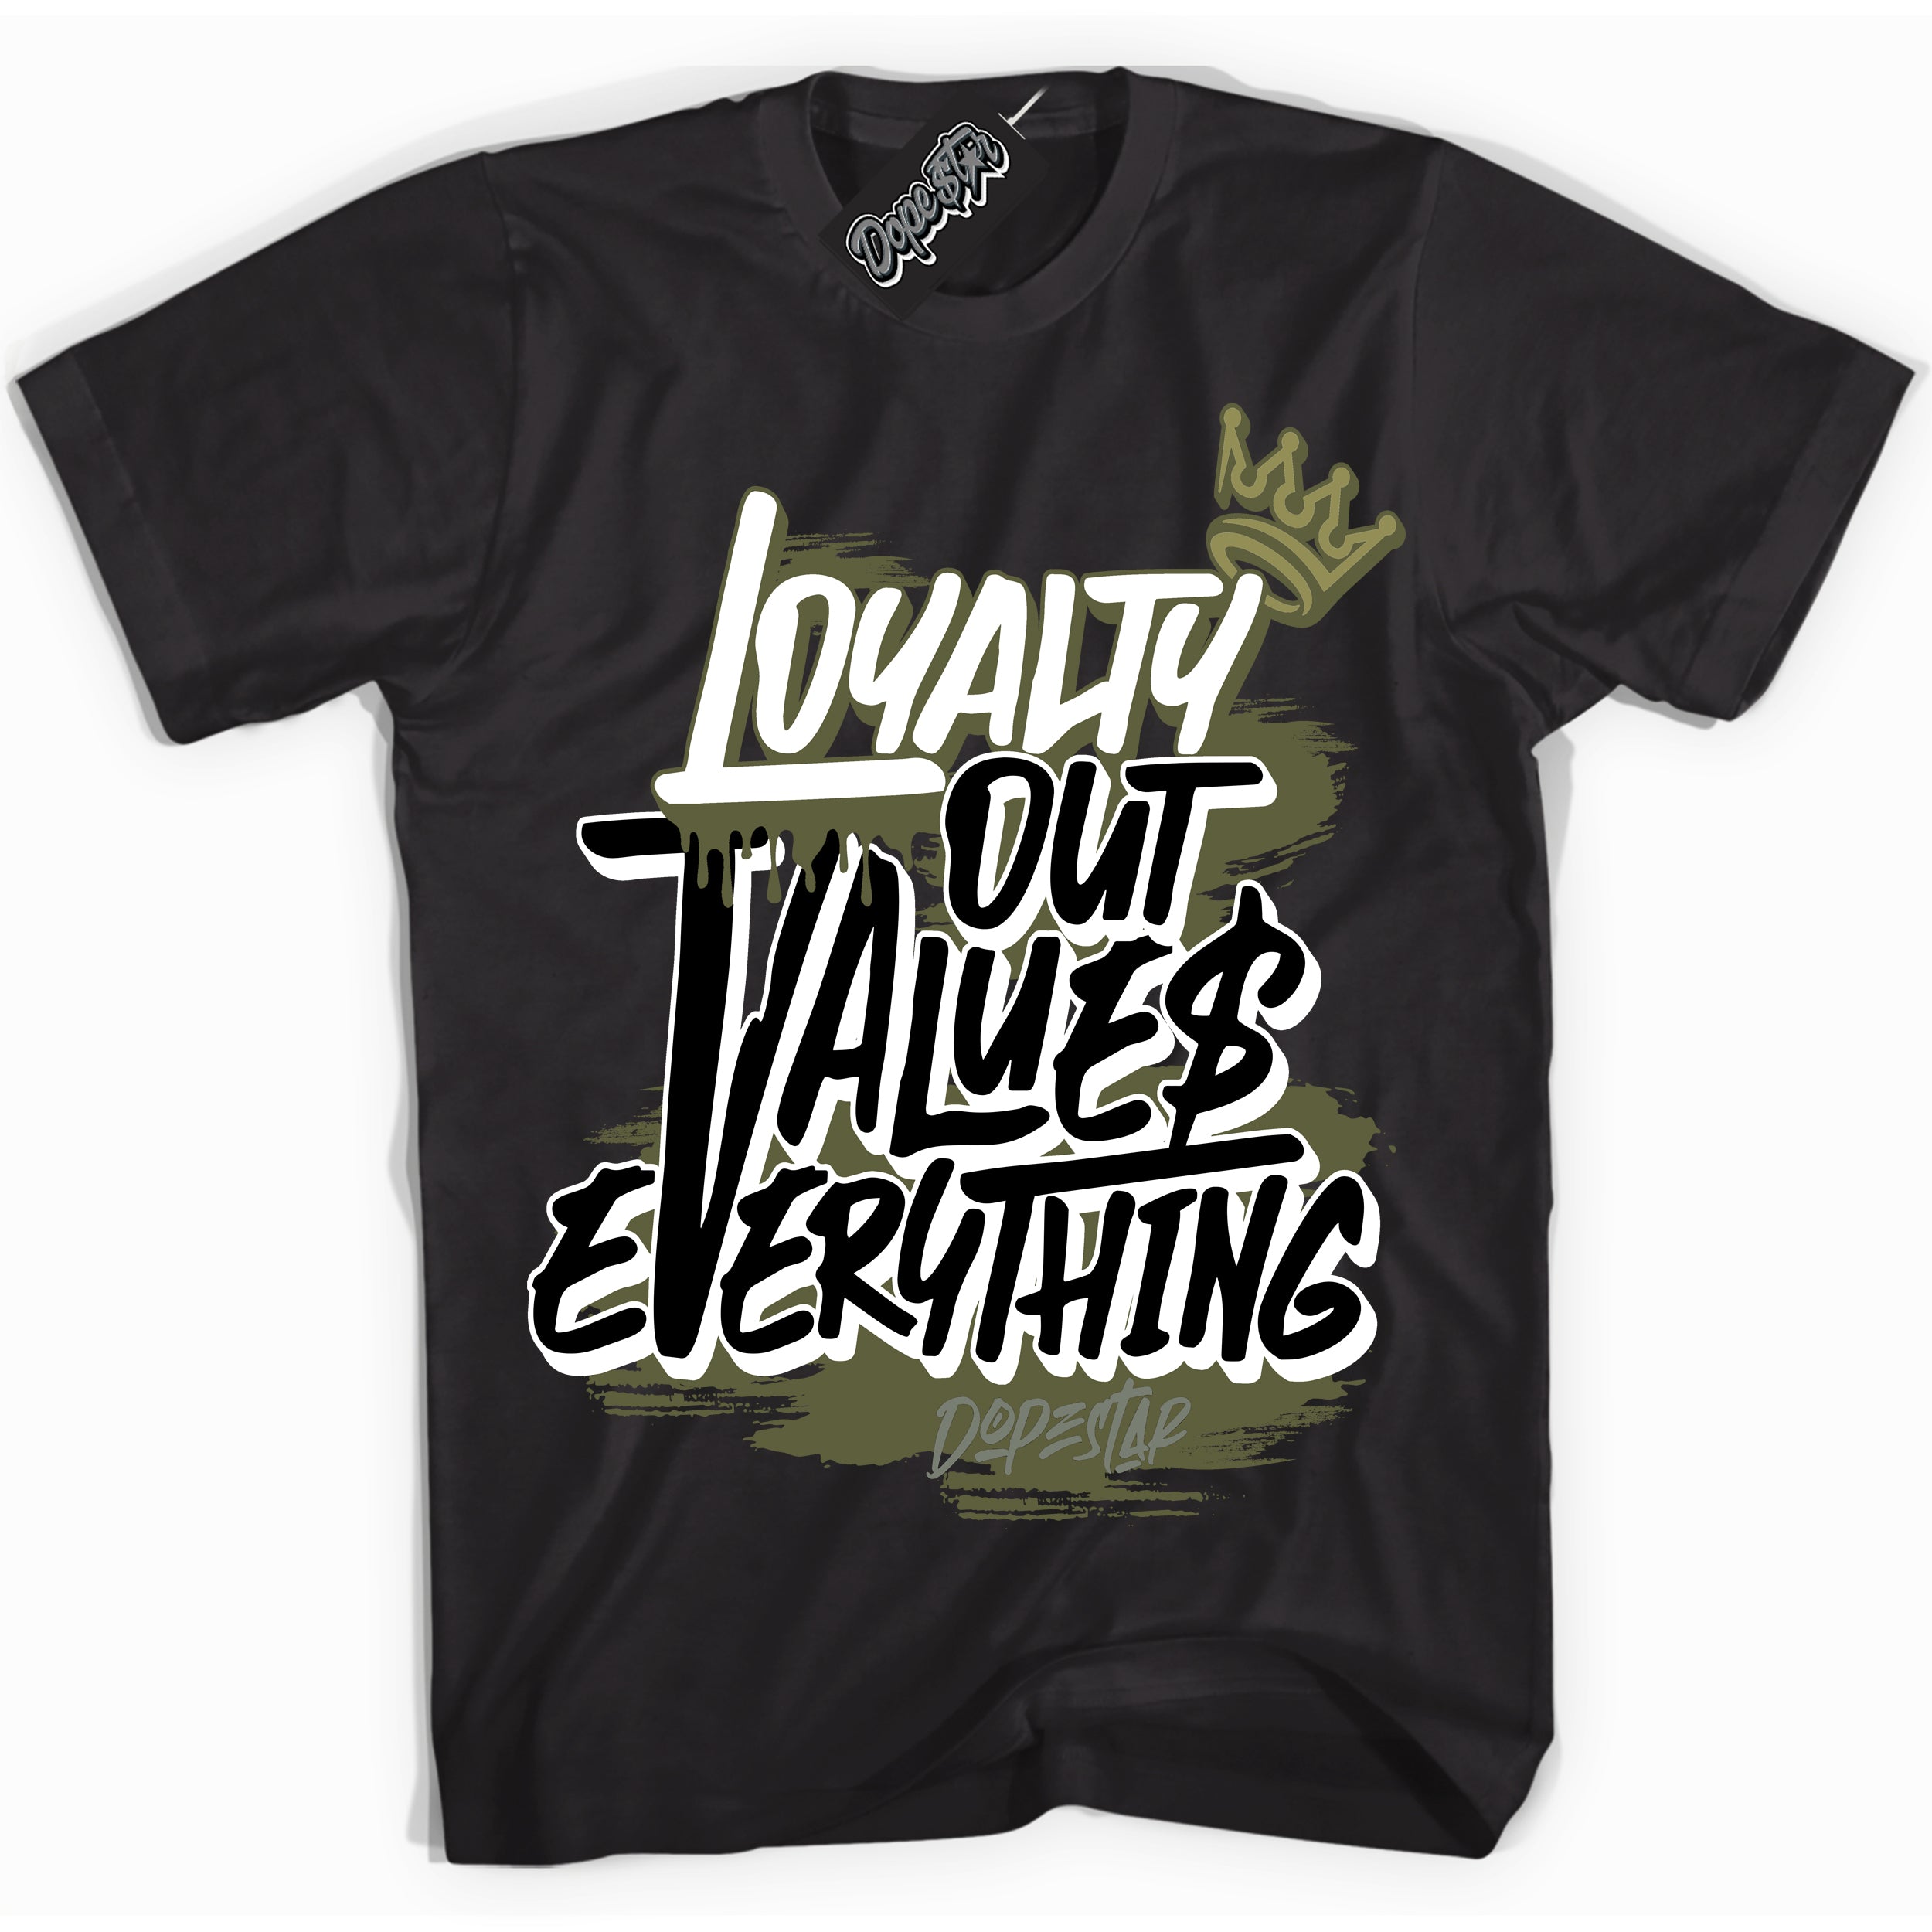 Cool Black Shirt with “ Loyalty Out Values Everything” design that perfectly matches Craft Olive 4s Sneakers.